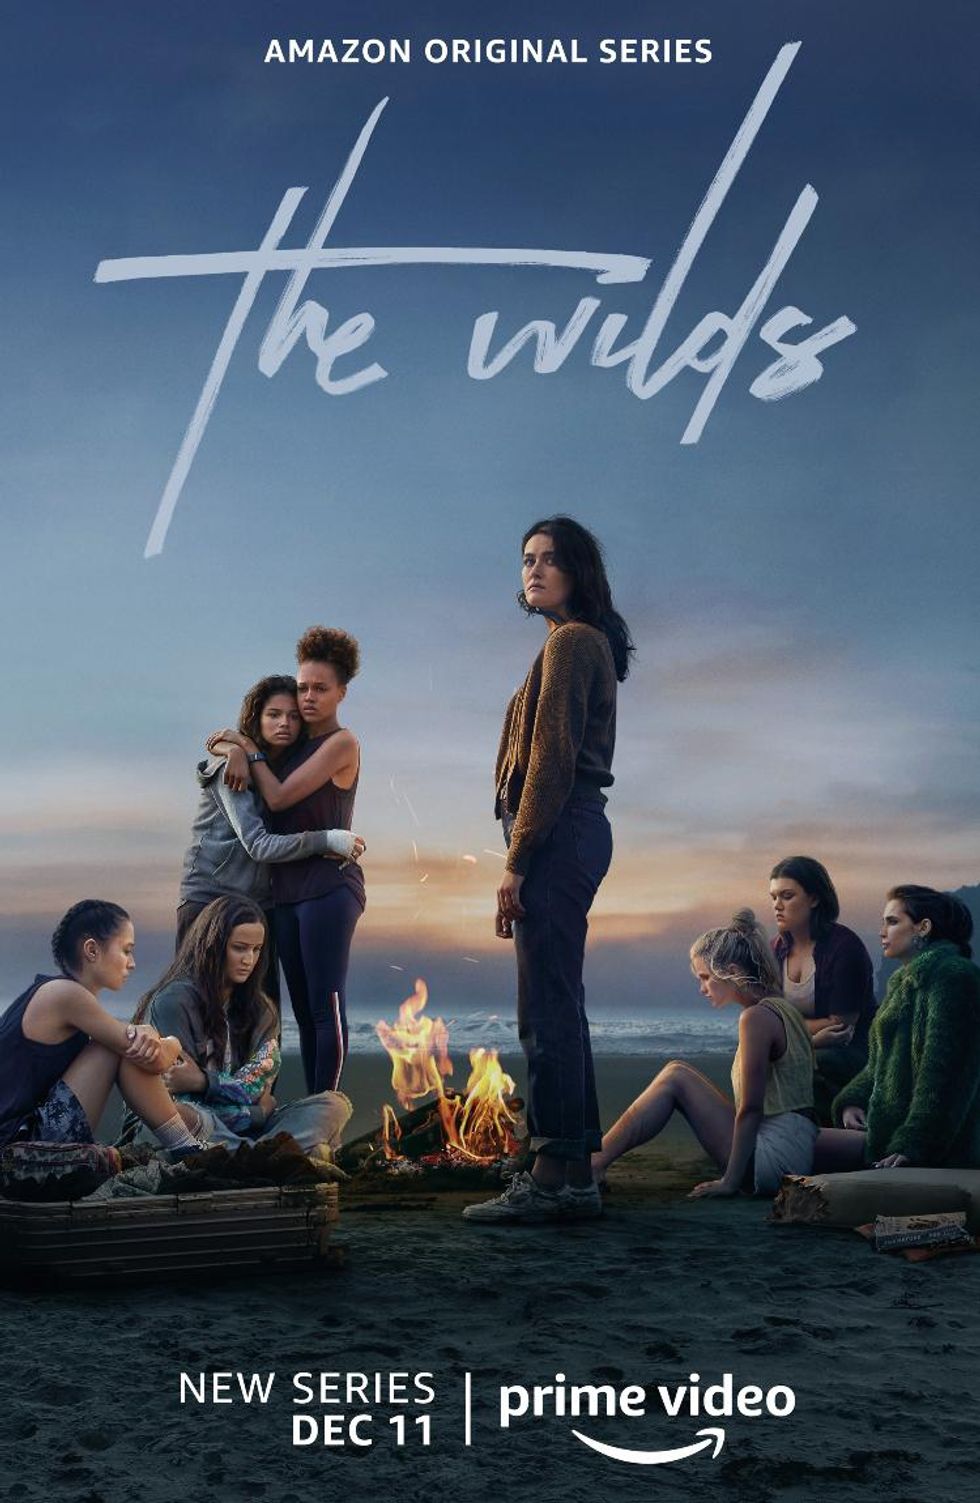 Amazon's YA Survival Series 'The Wilds' Is Our New, Queer AF Obsession